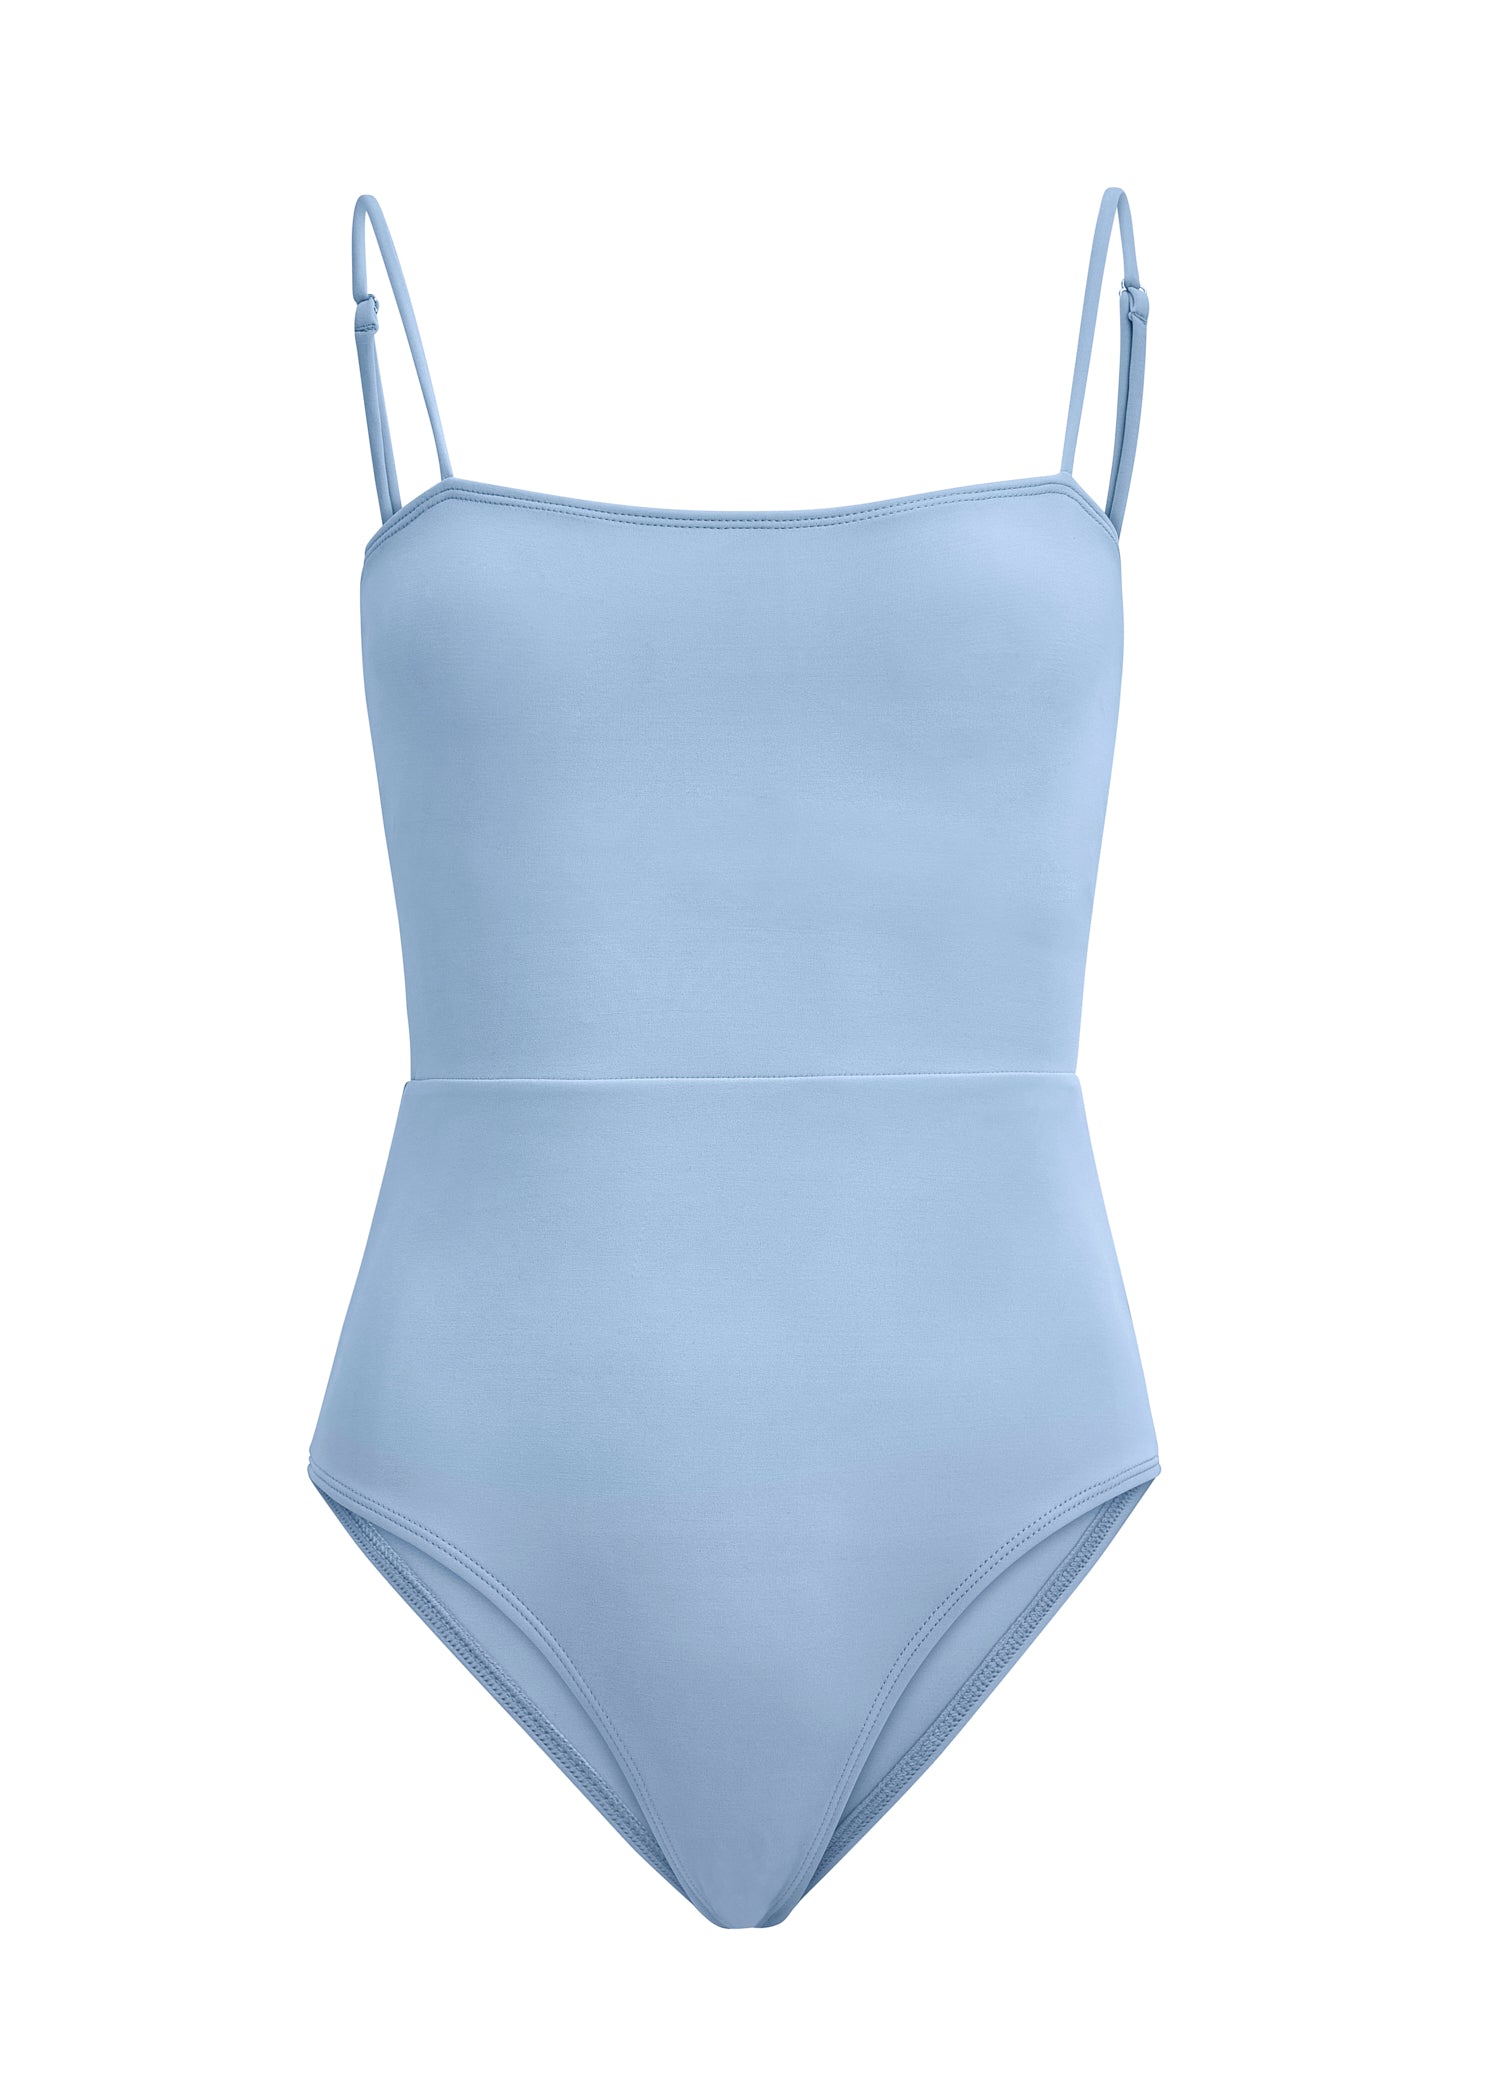 The Nyla Suit in Cloudy Blue